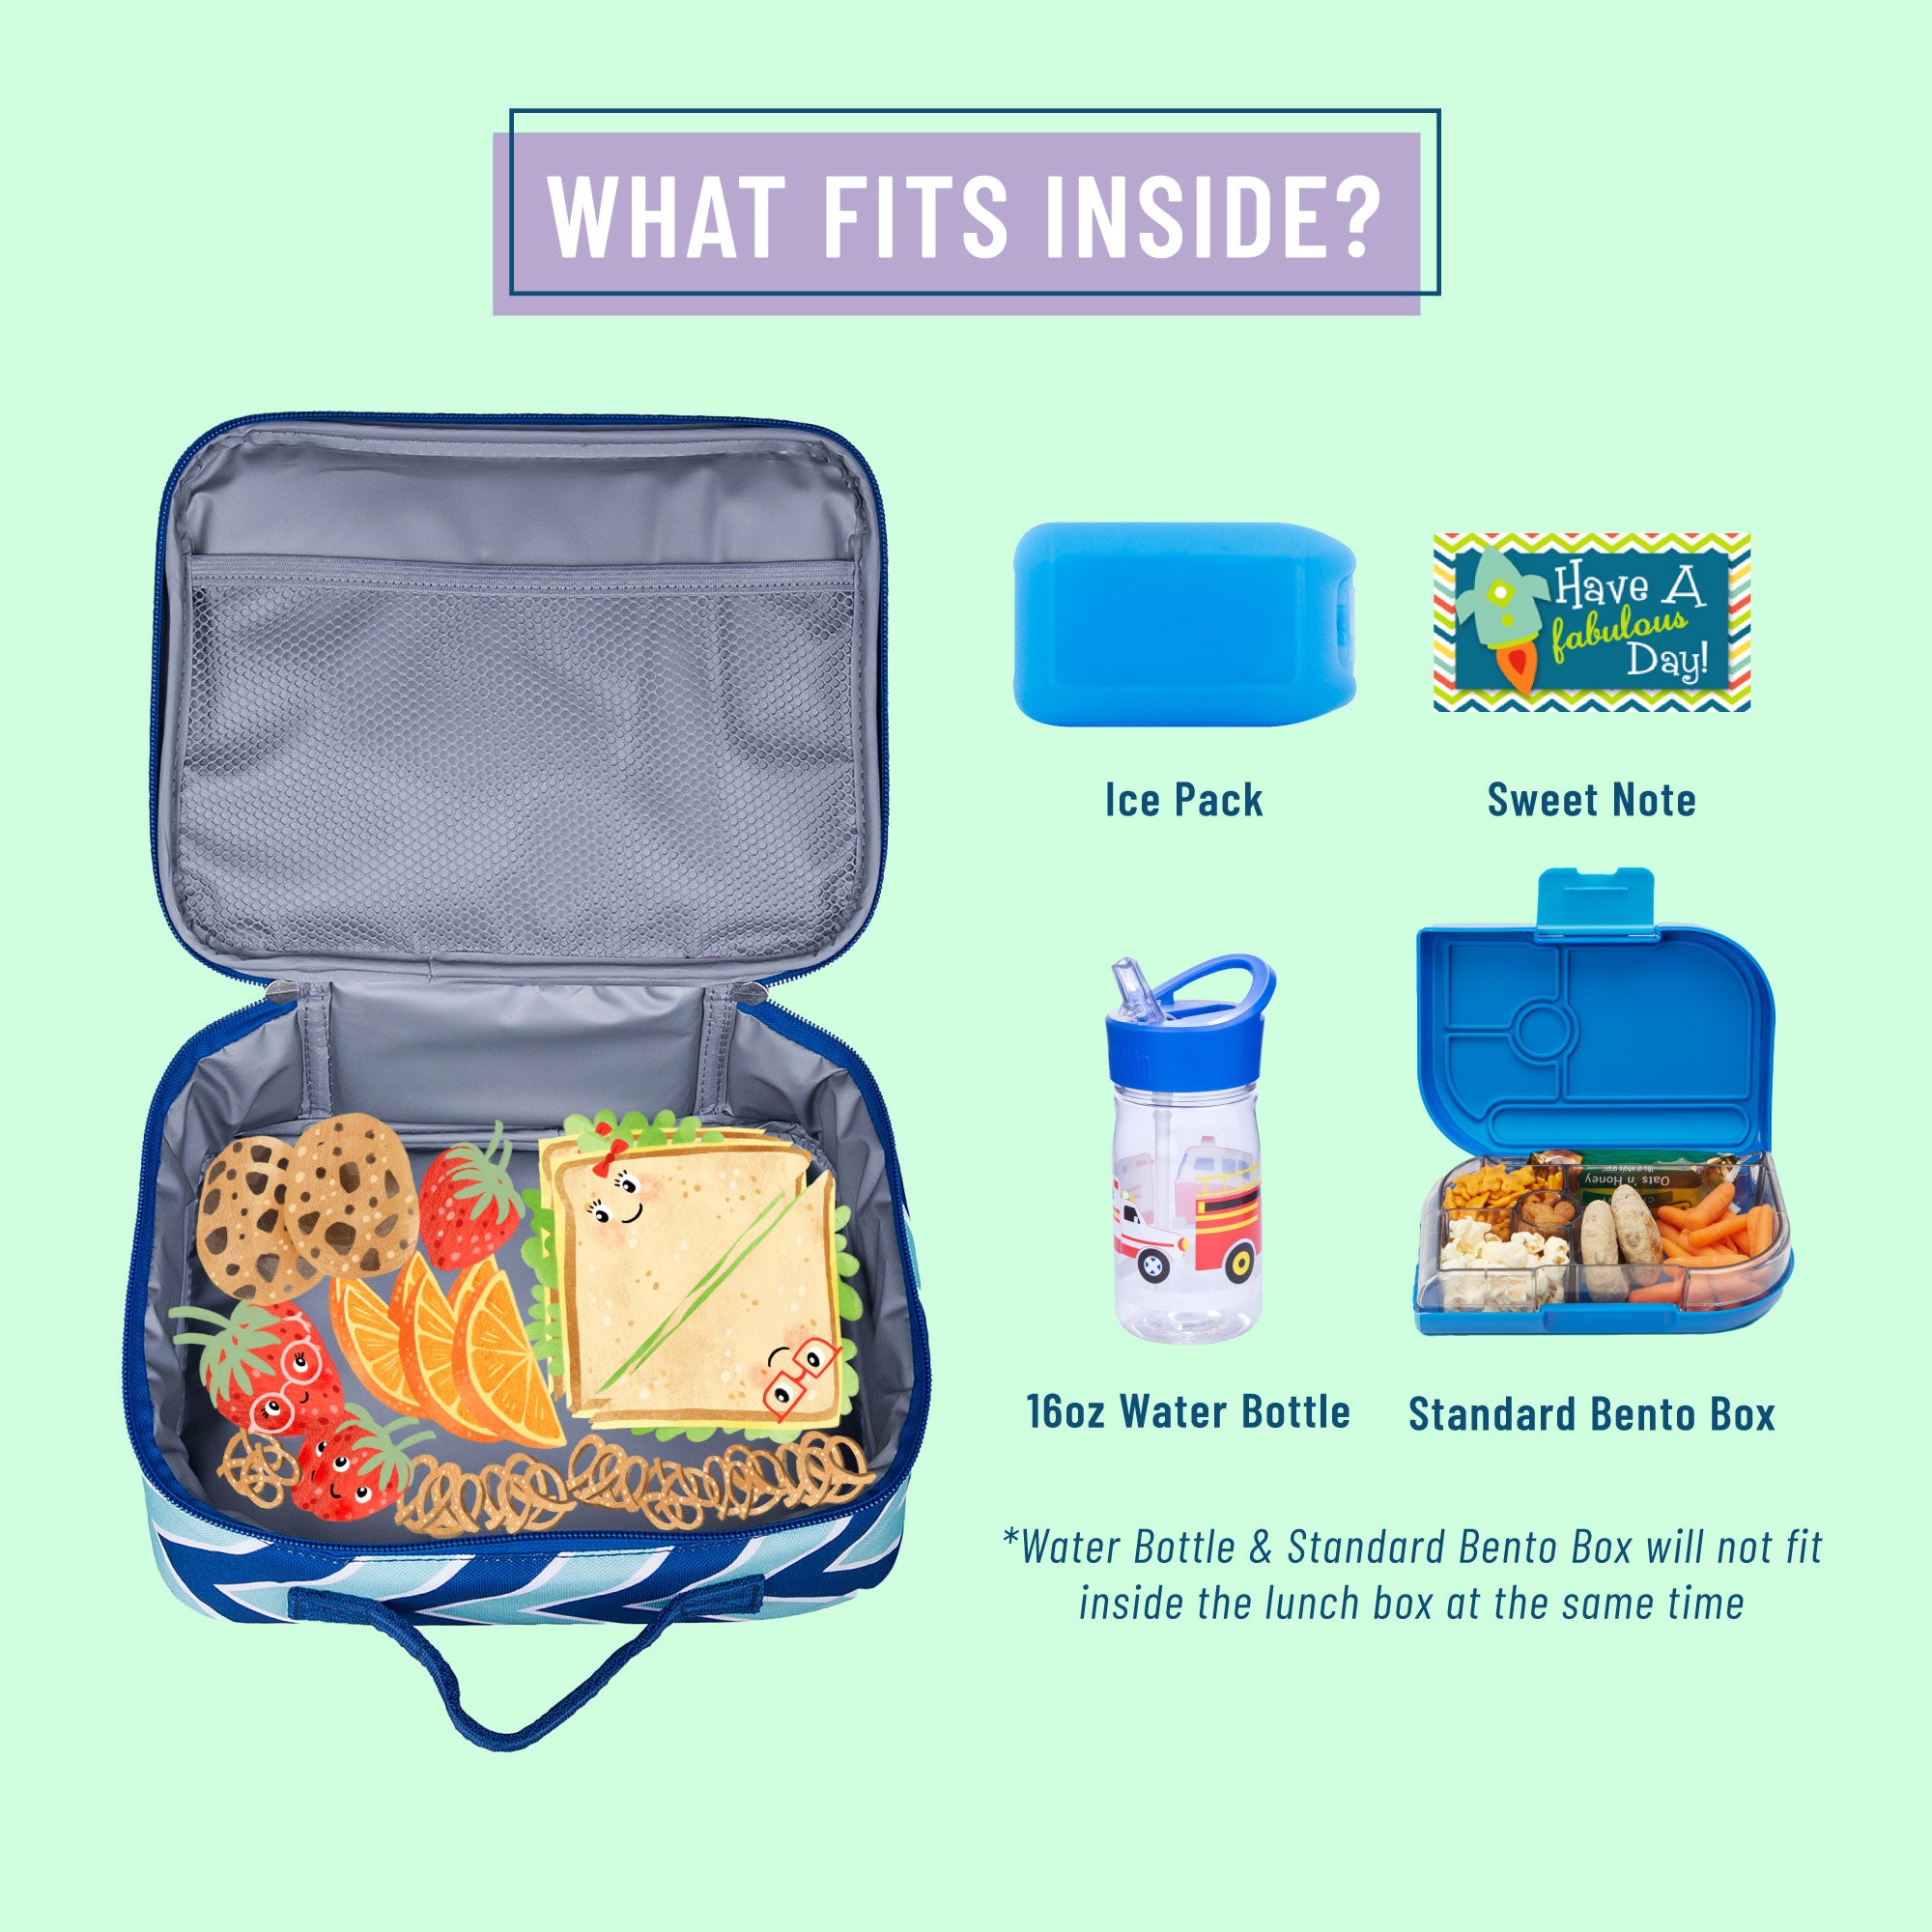 11 Stylish Lunch Boxes For The College Student On The Go